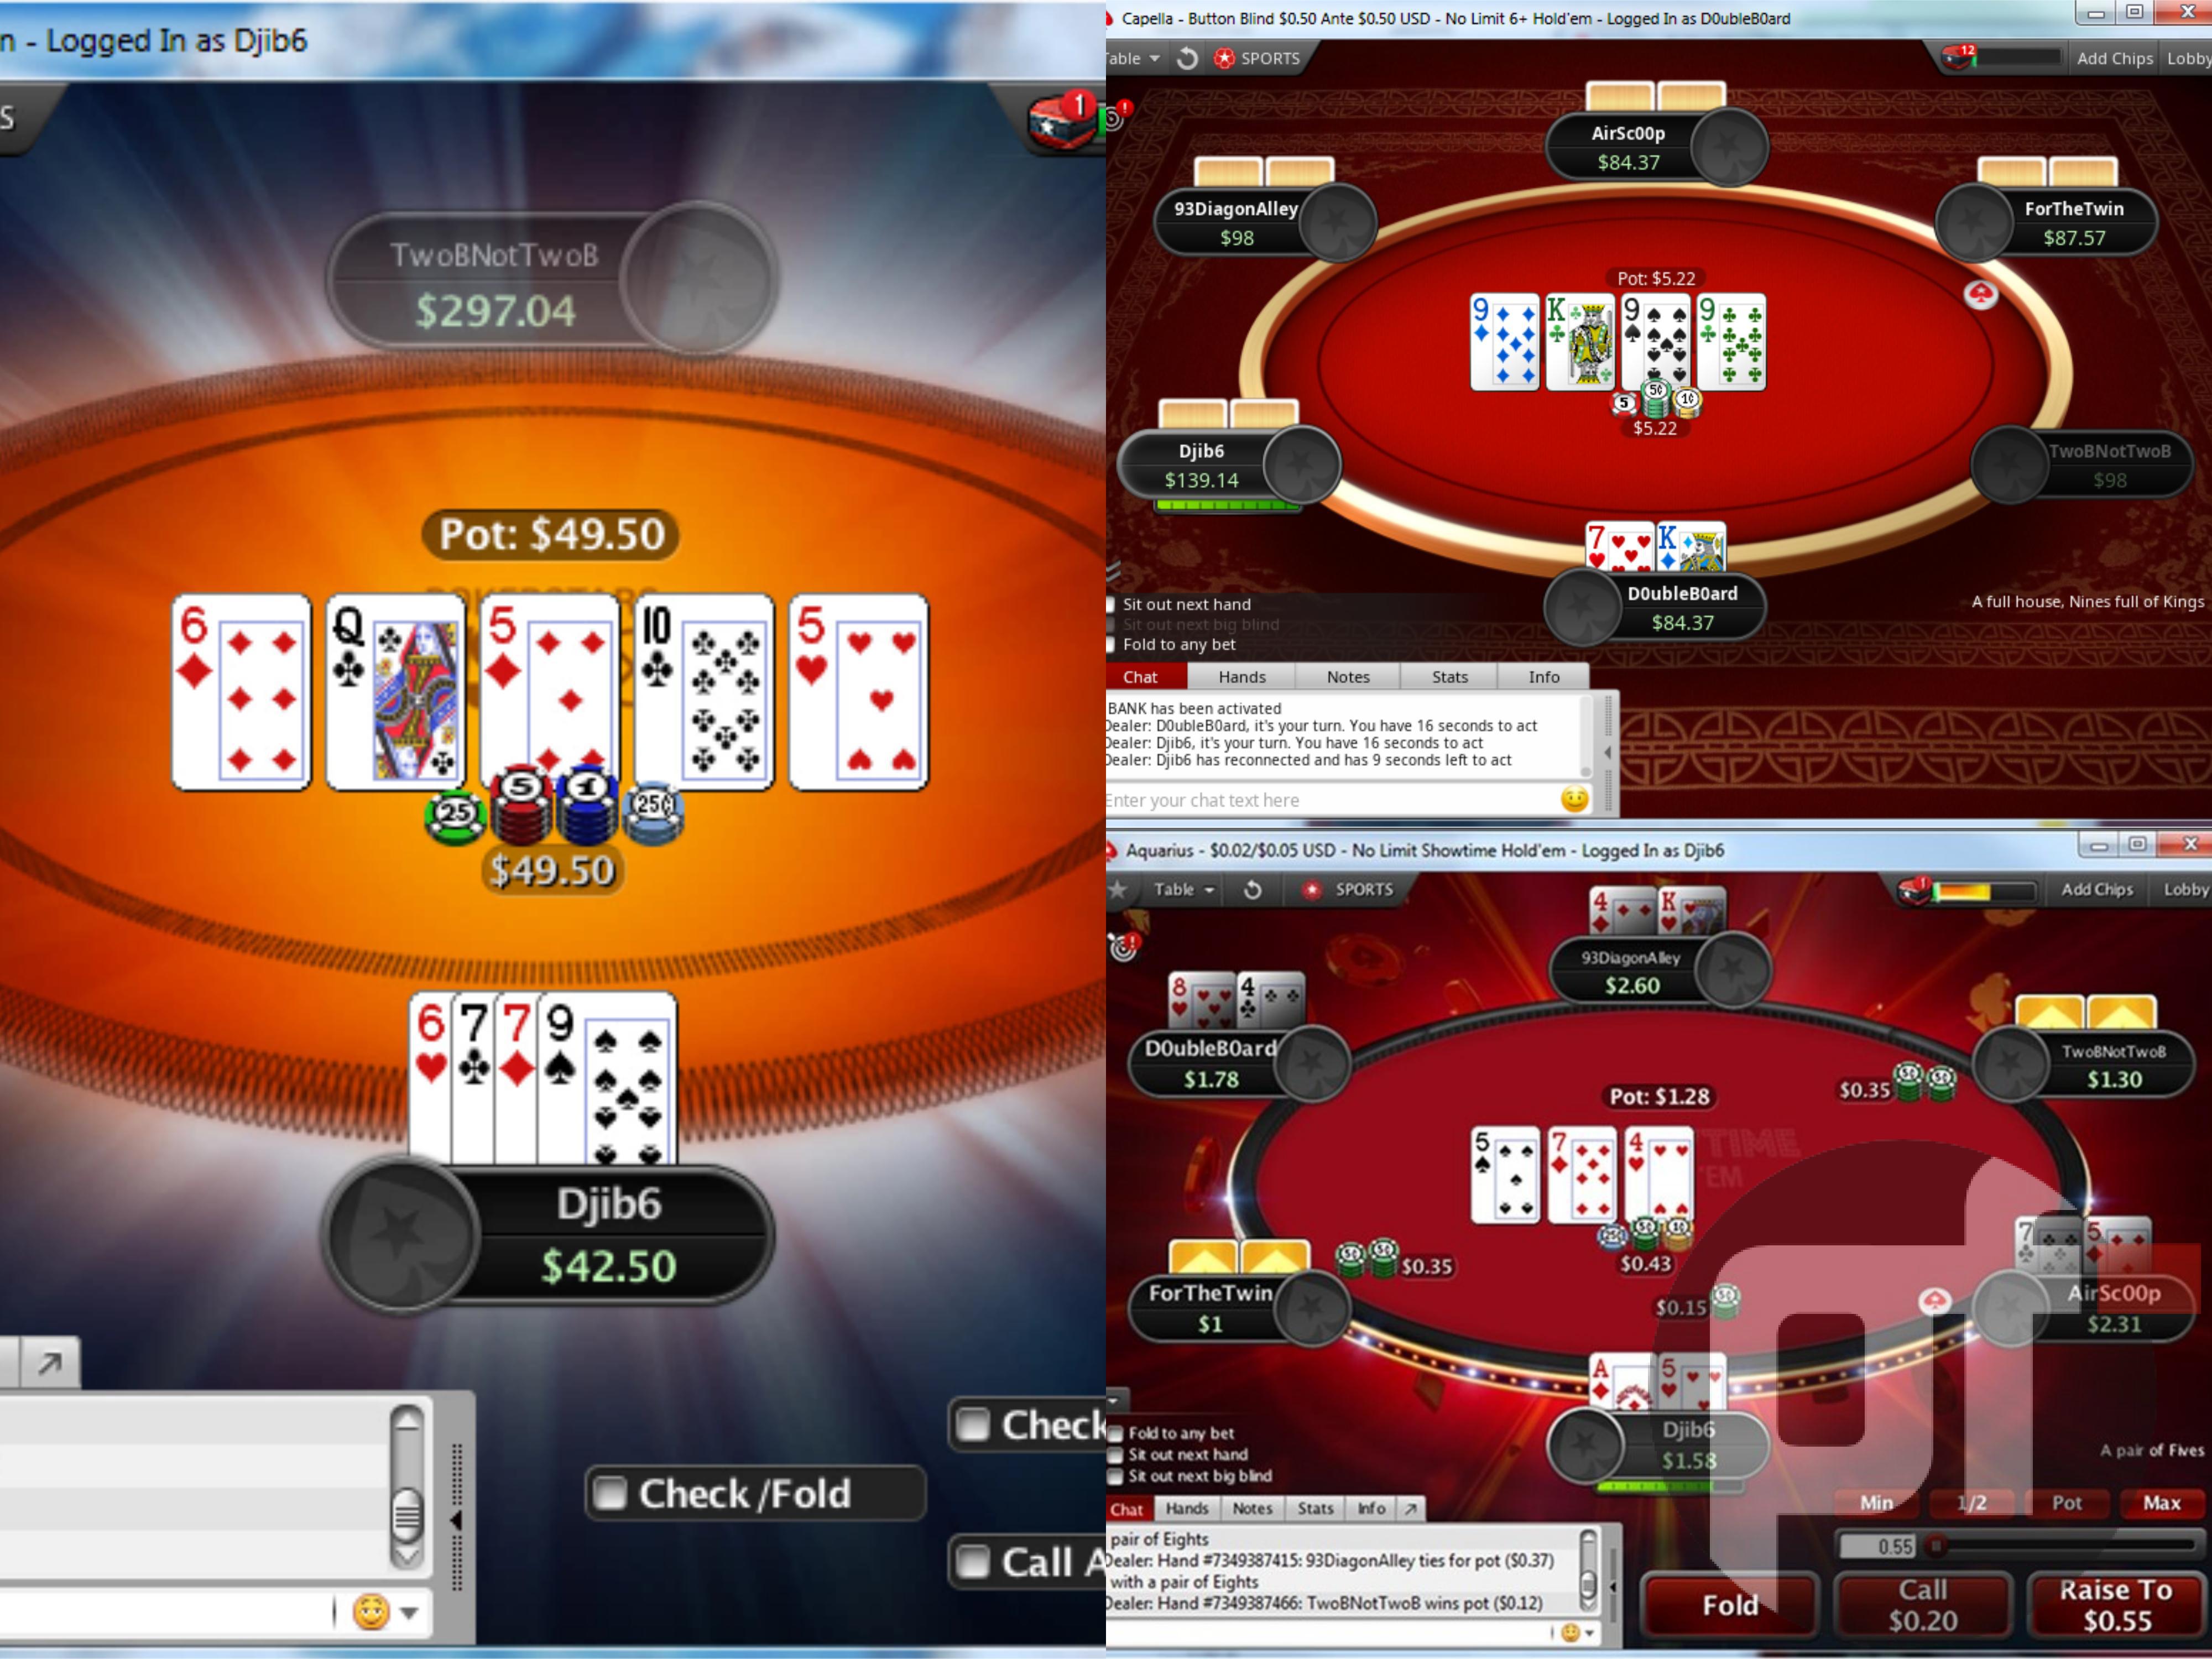 Disciplinary Attachment Understand Exclusive: 6+ Hold'em, Showtime and Fusion to Return to PokerStars in  Tournament Format | Pokerfuse